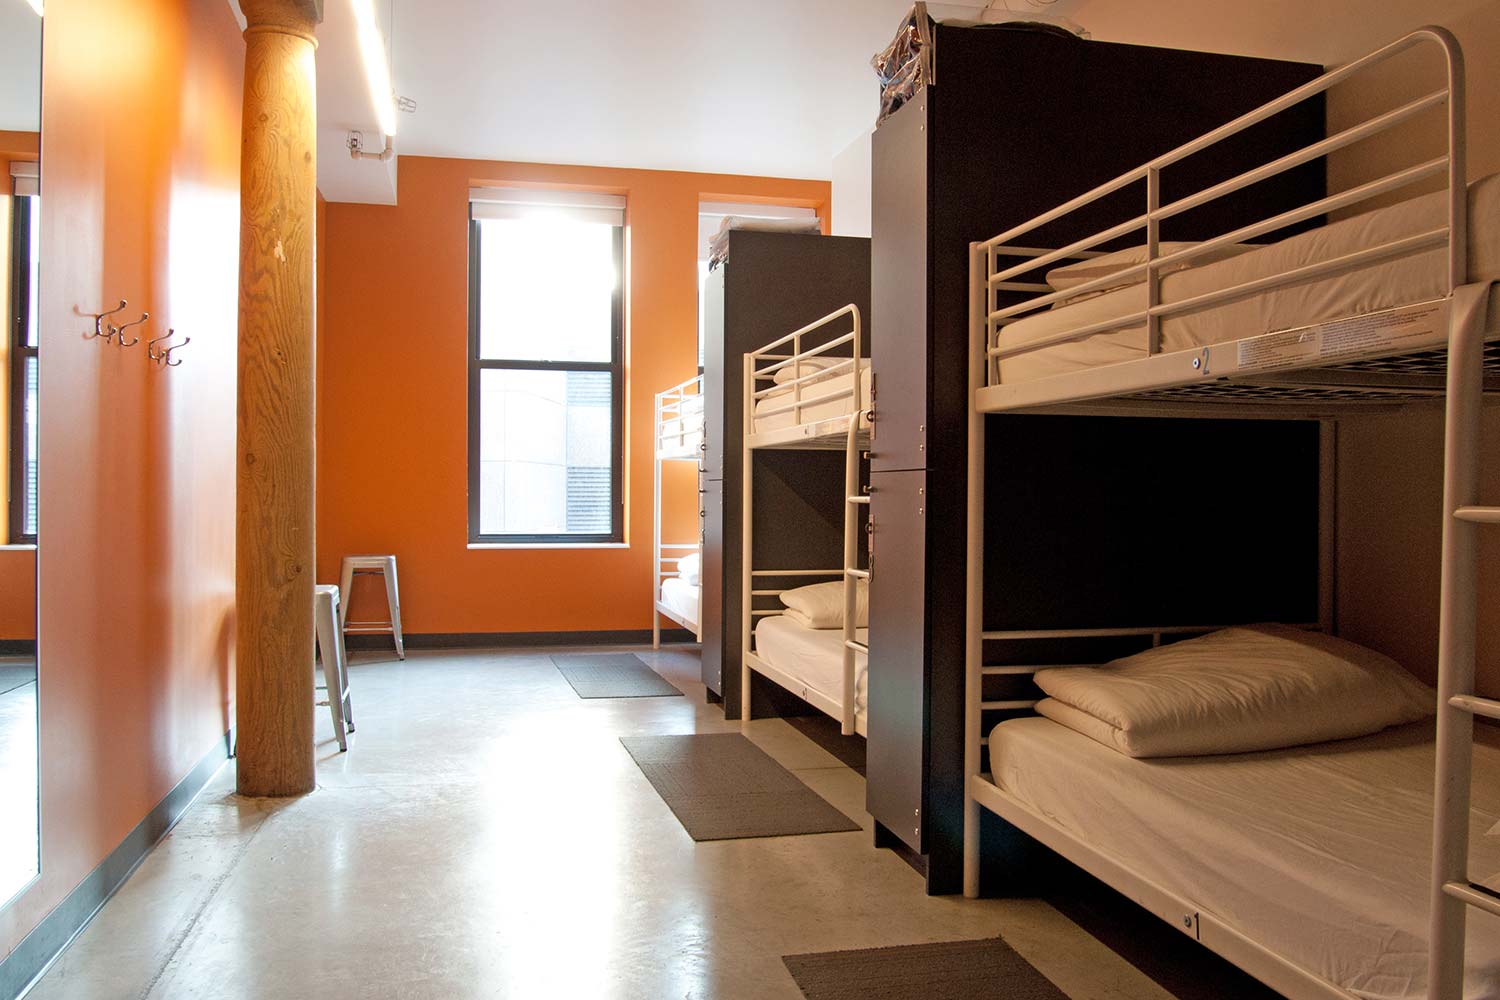 a dorm room at HI Boston Hostel with three sets of twin-sized bunkbeds, with privacy walls between each set of beds.